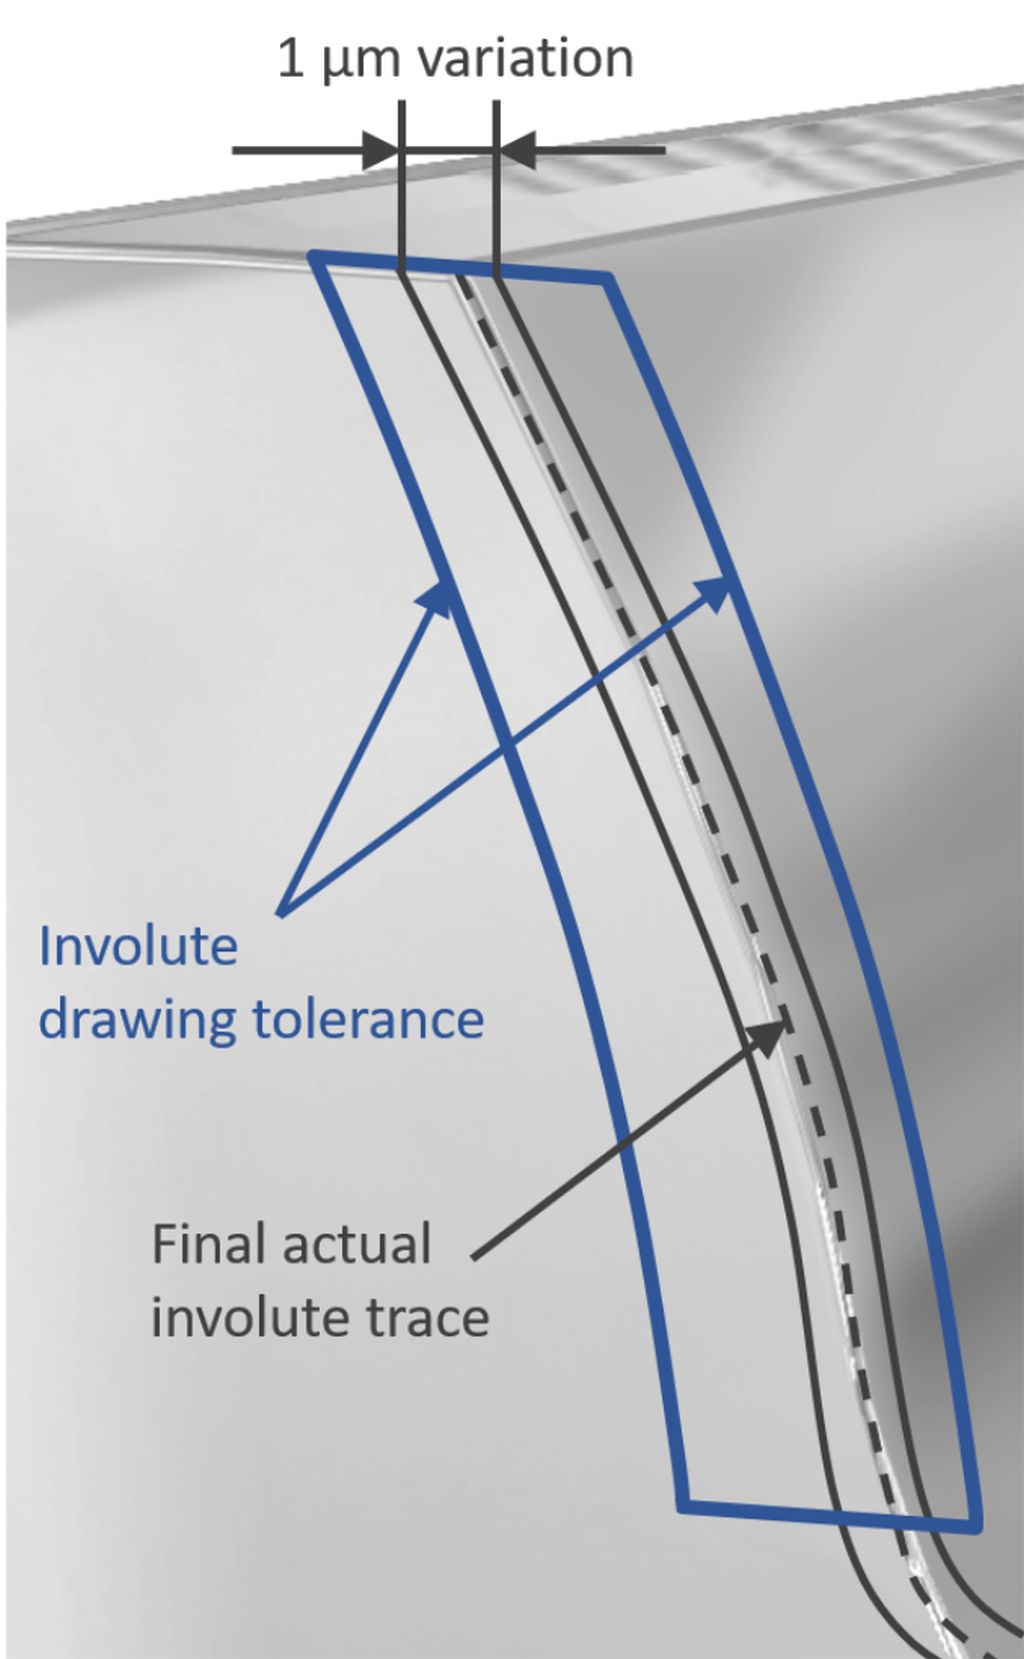 Diagram showing the calculated variation of material removal along involutes